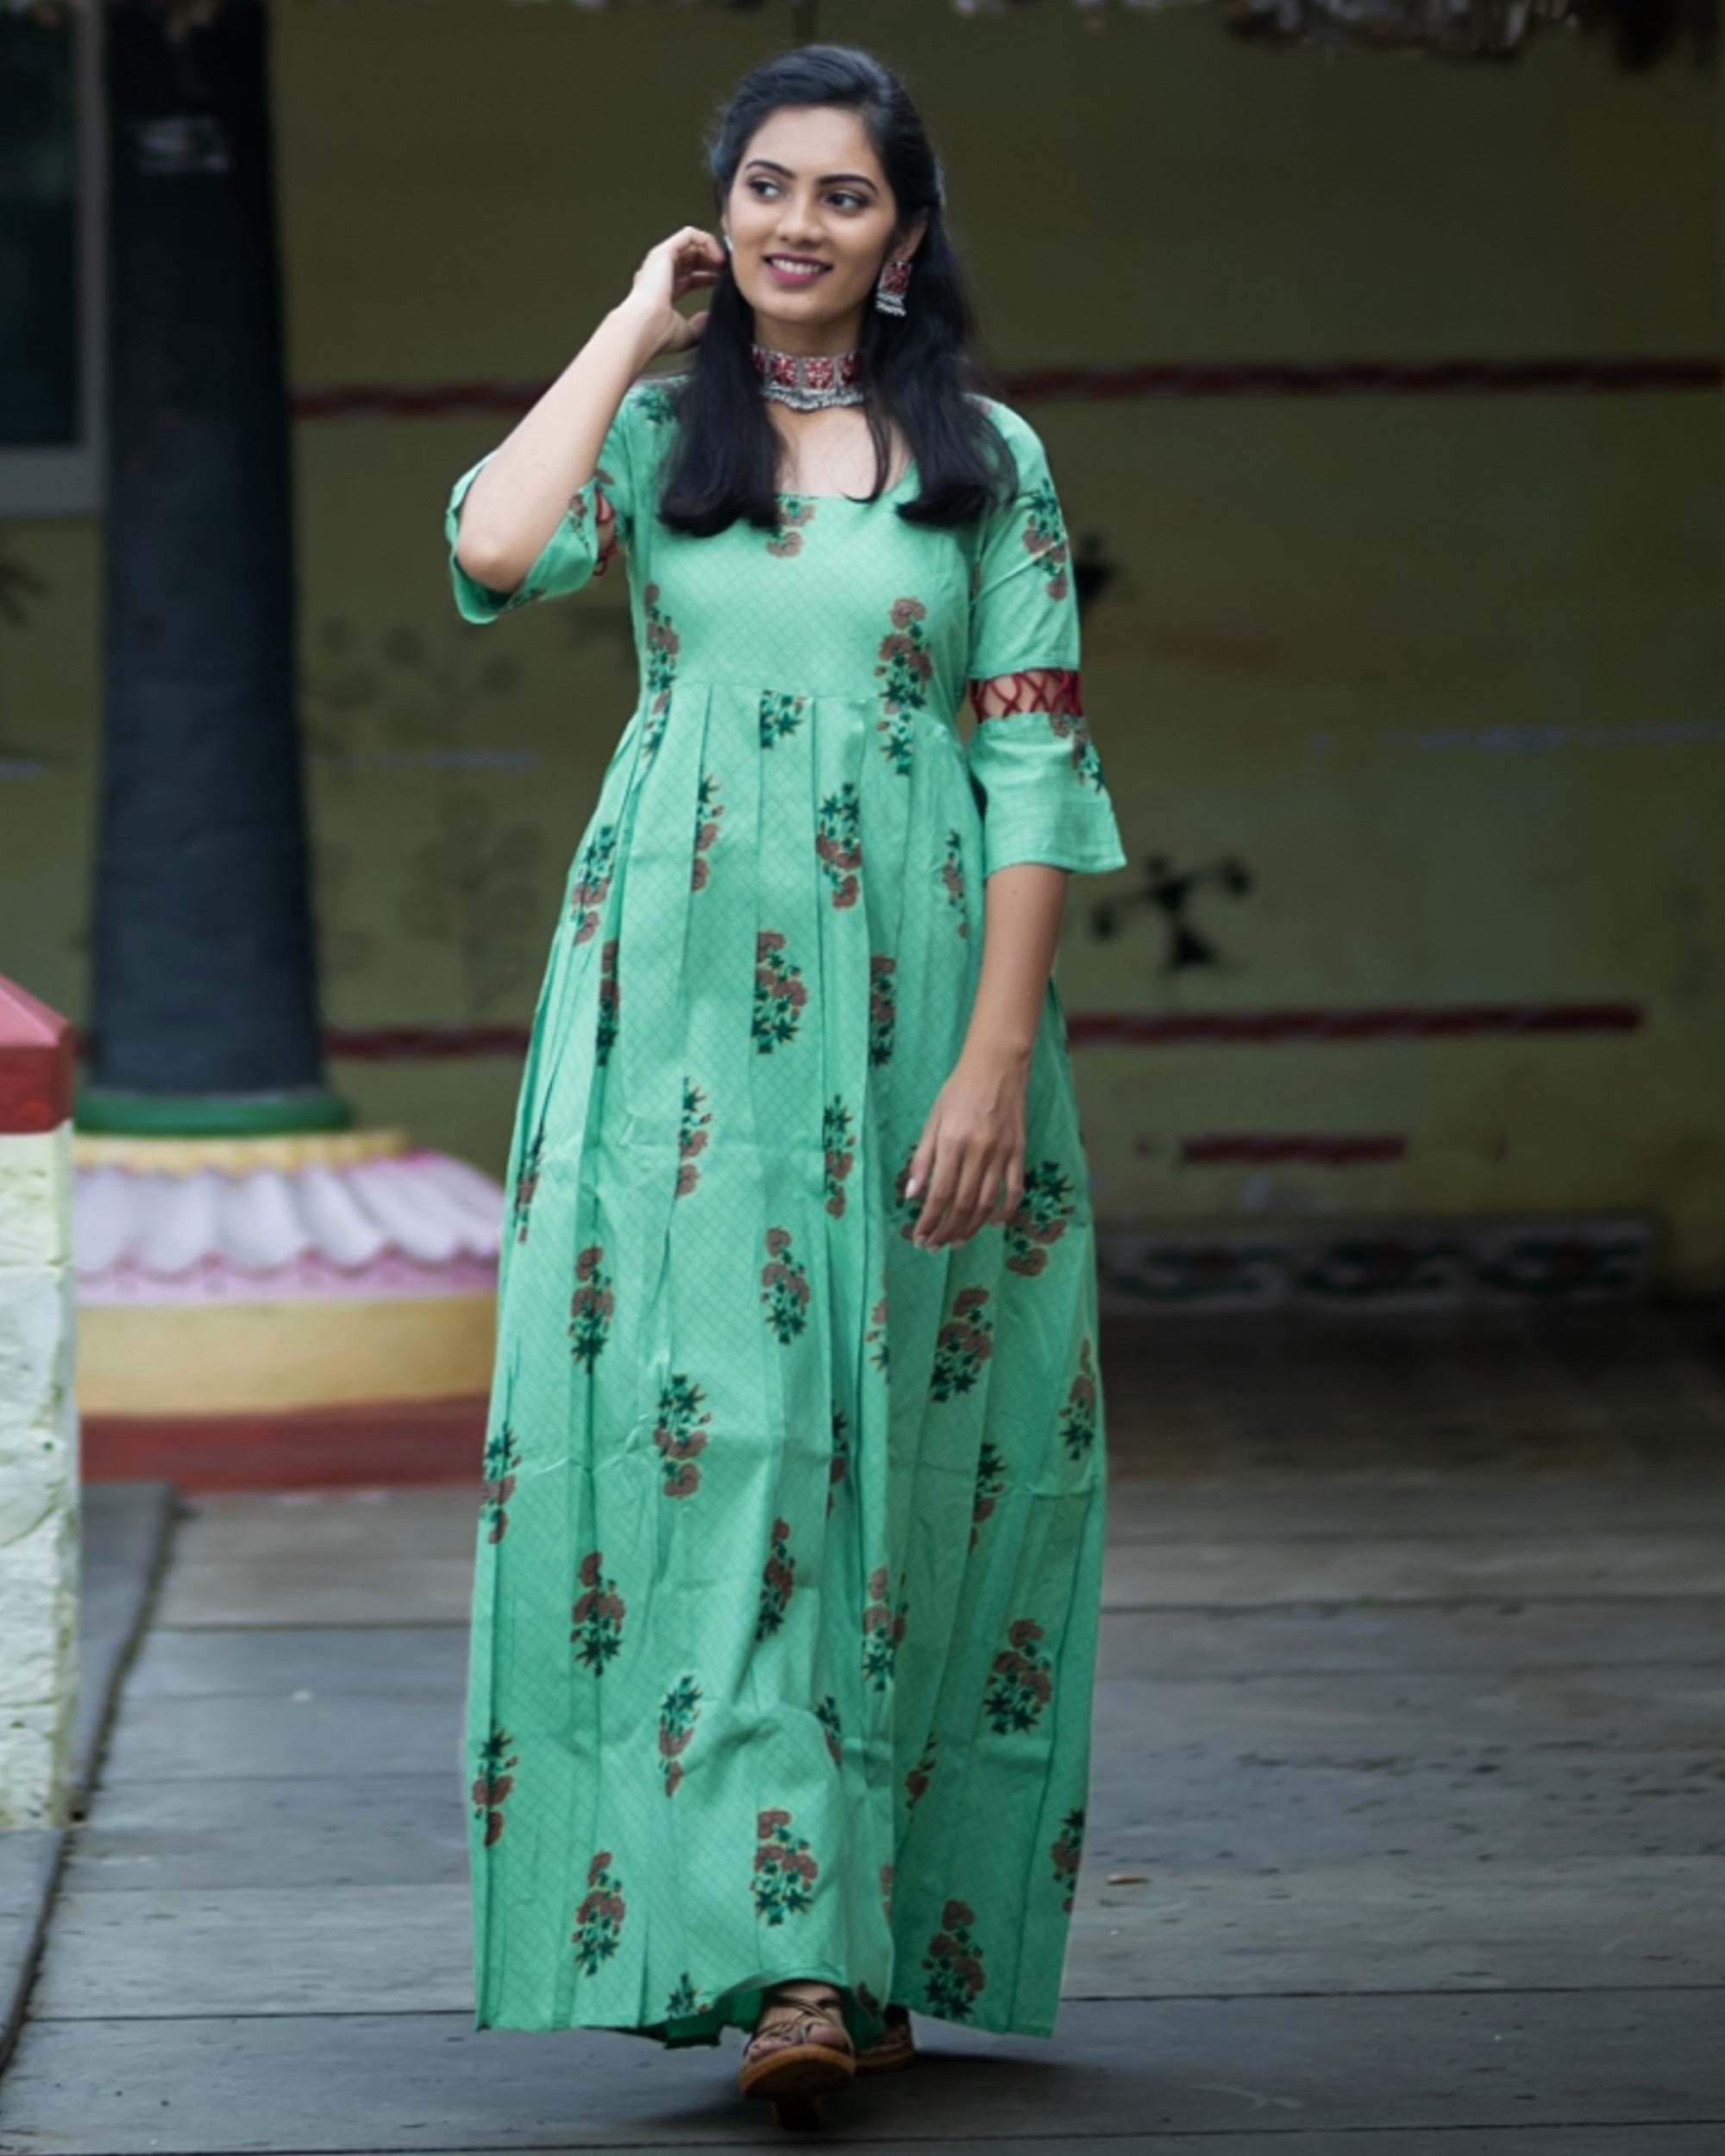 Pistachio green floral printed pleated dress with sleeve detailing